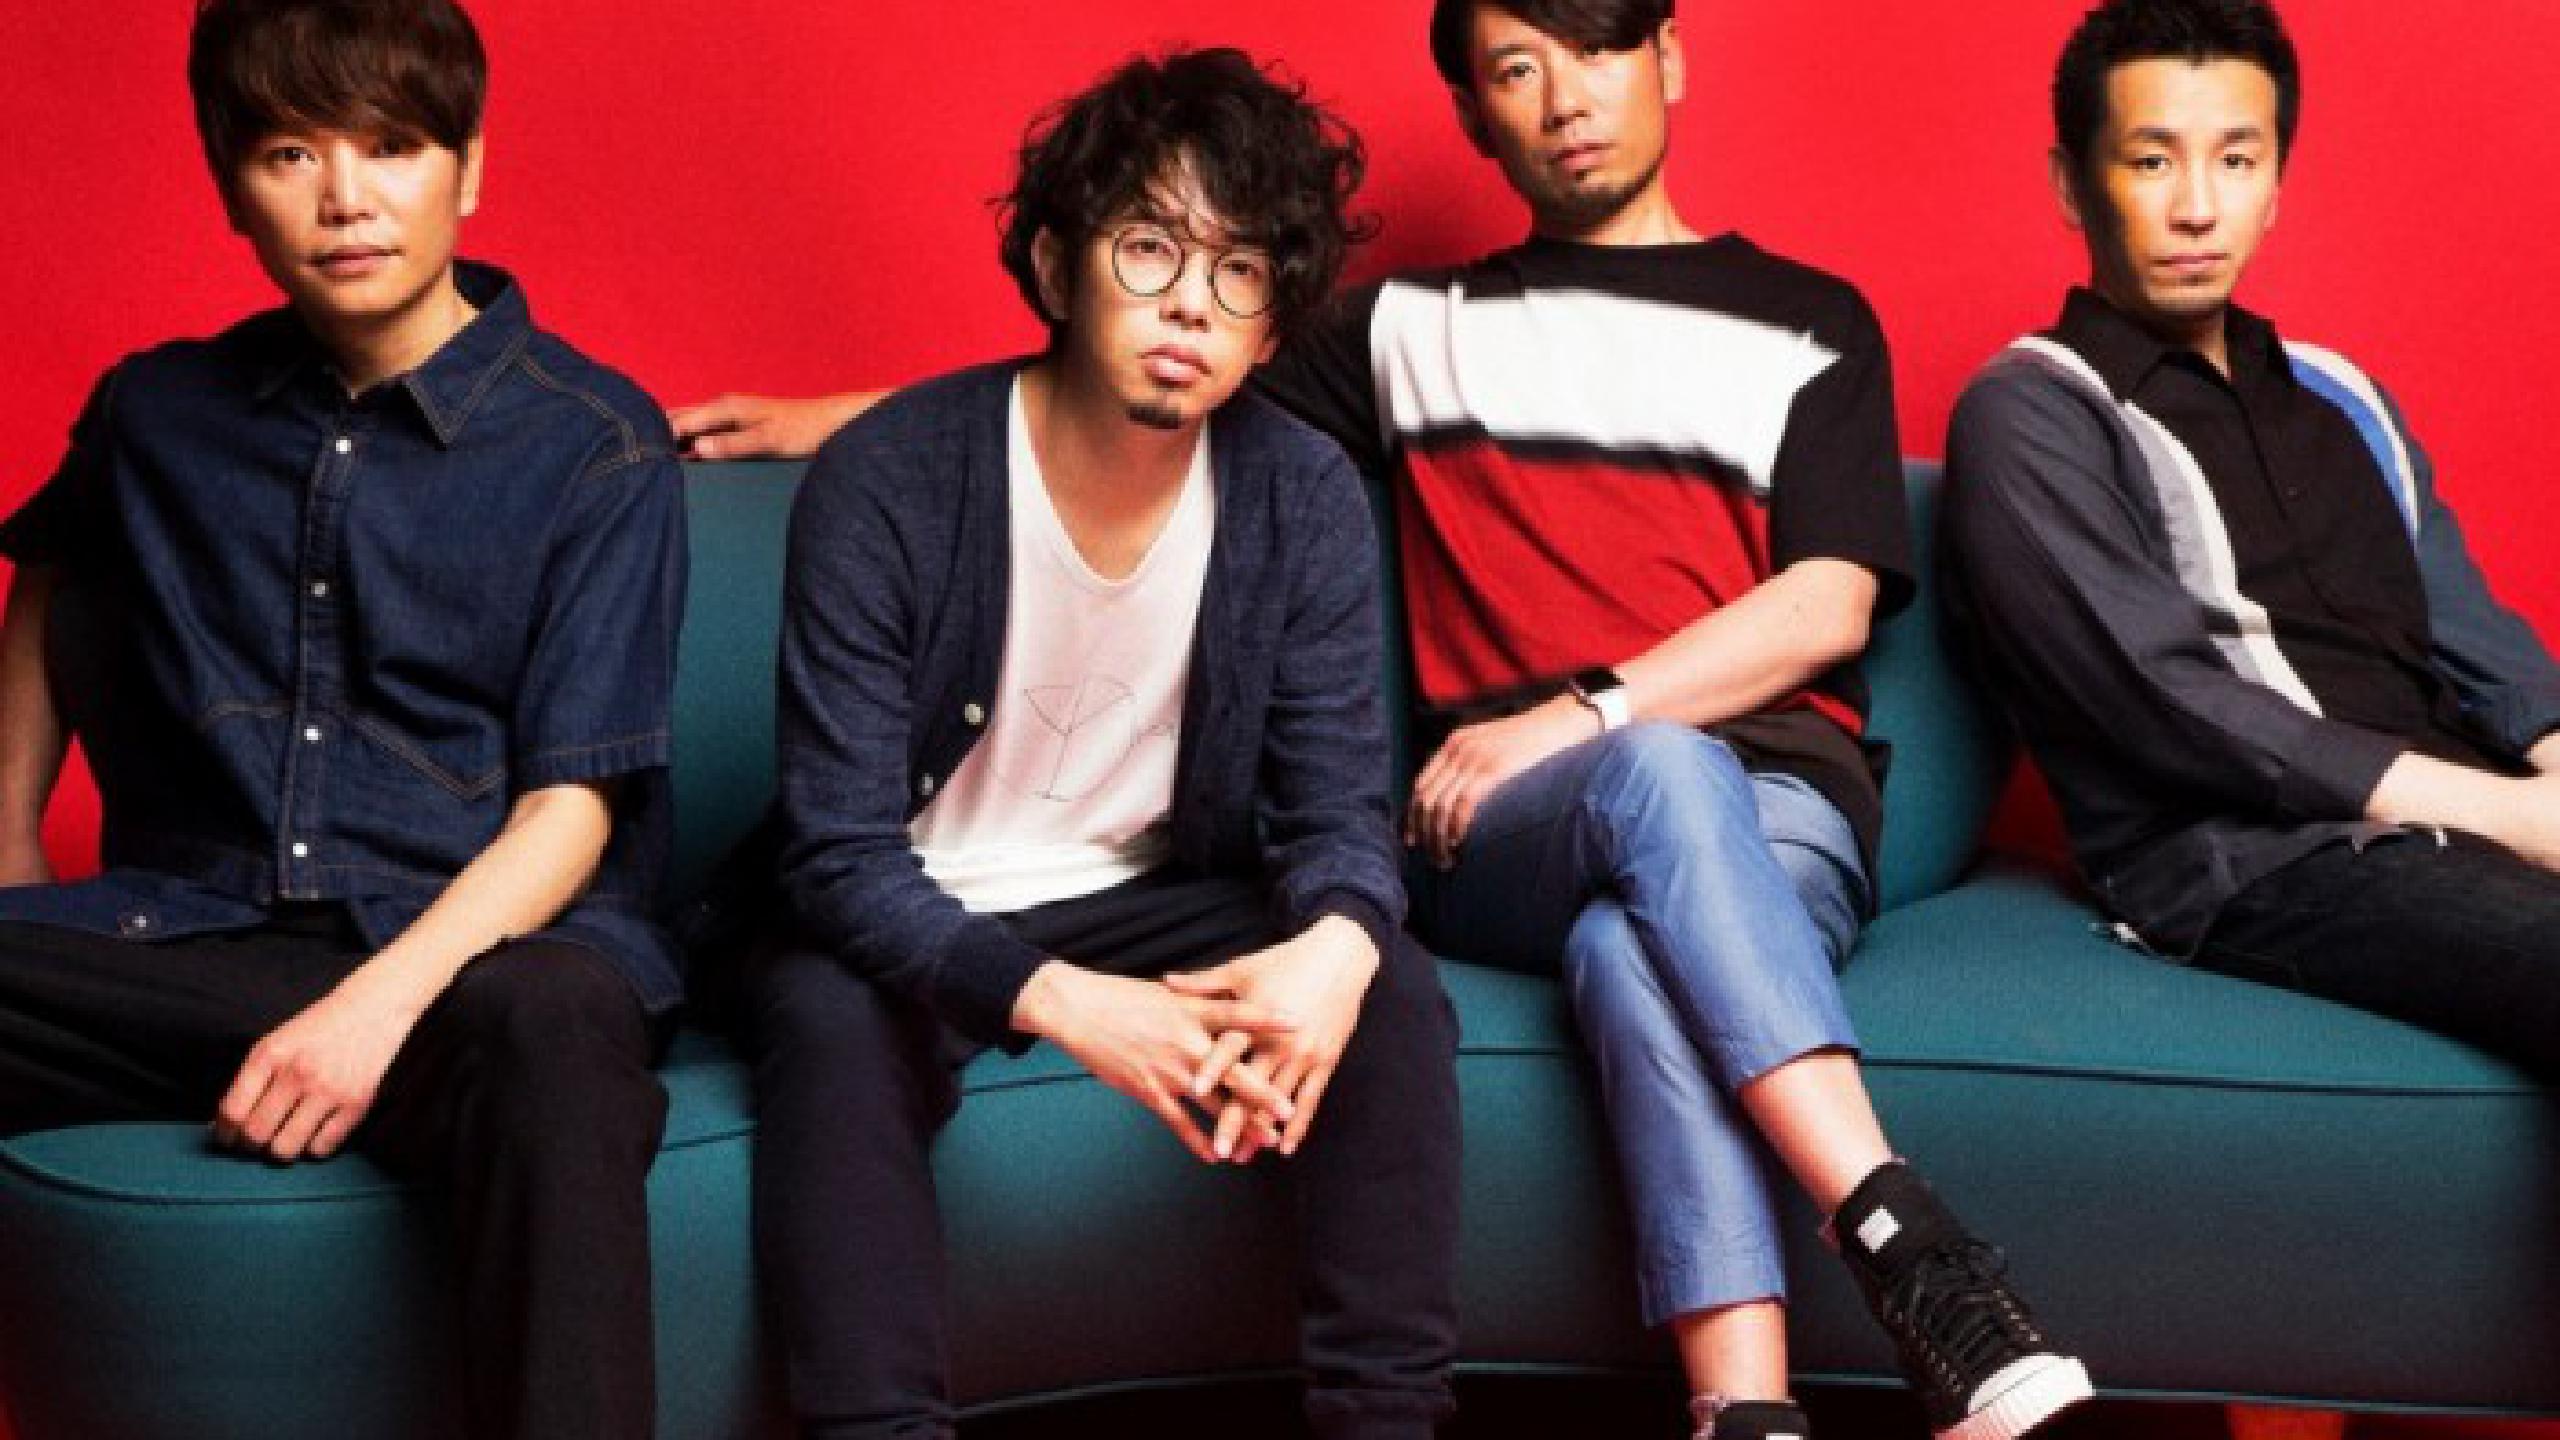 Asian Kung Fu Generation Tour Dates 2022 2023. Asian Kung Fu Generation Tickets And Concerts